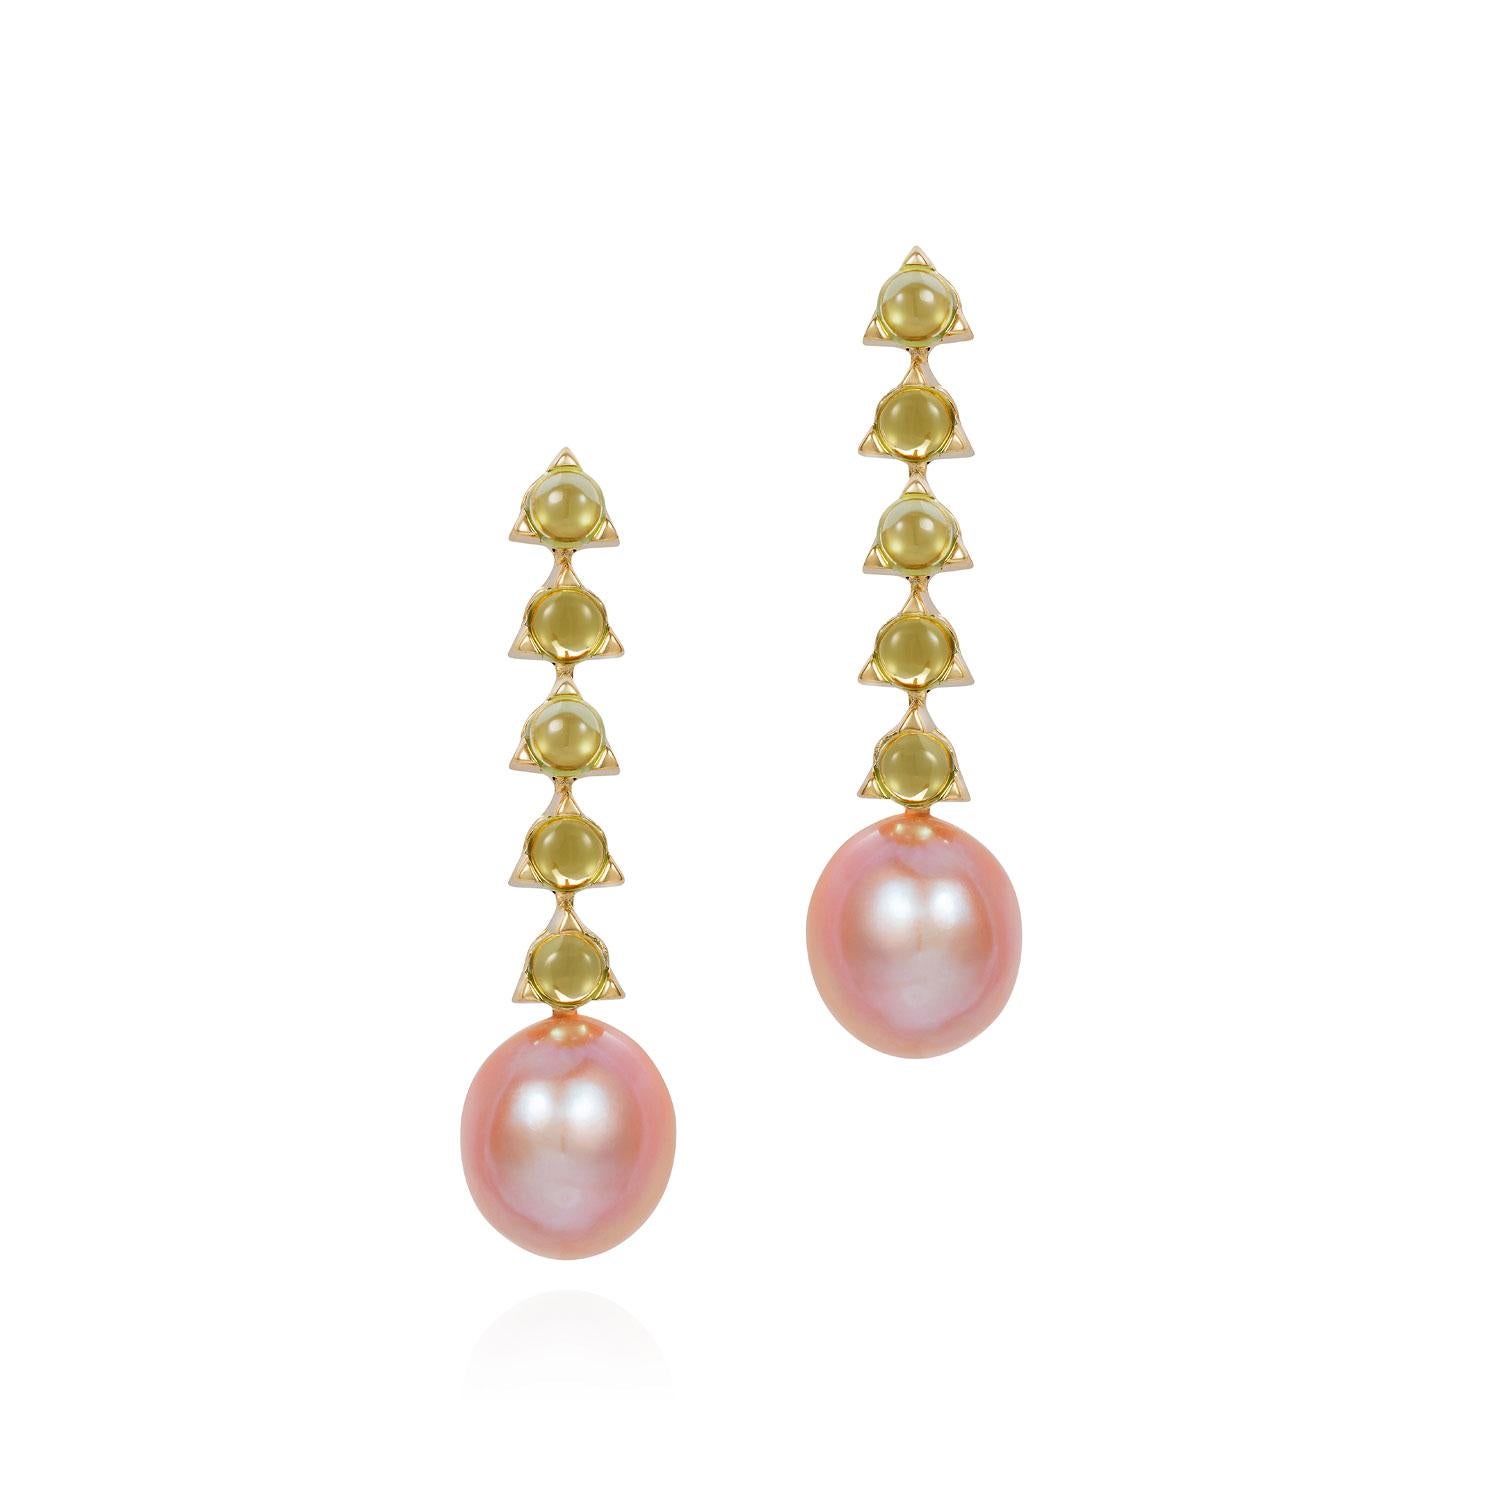 Contemporary 5- 4mm Stone Baroque Peach Violet Pearl Earrings Black Onyx 18 K Yellow Gold For Sale